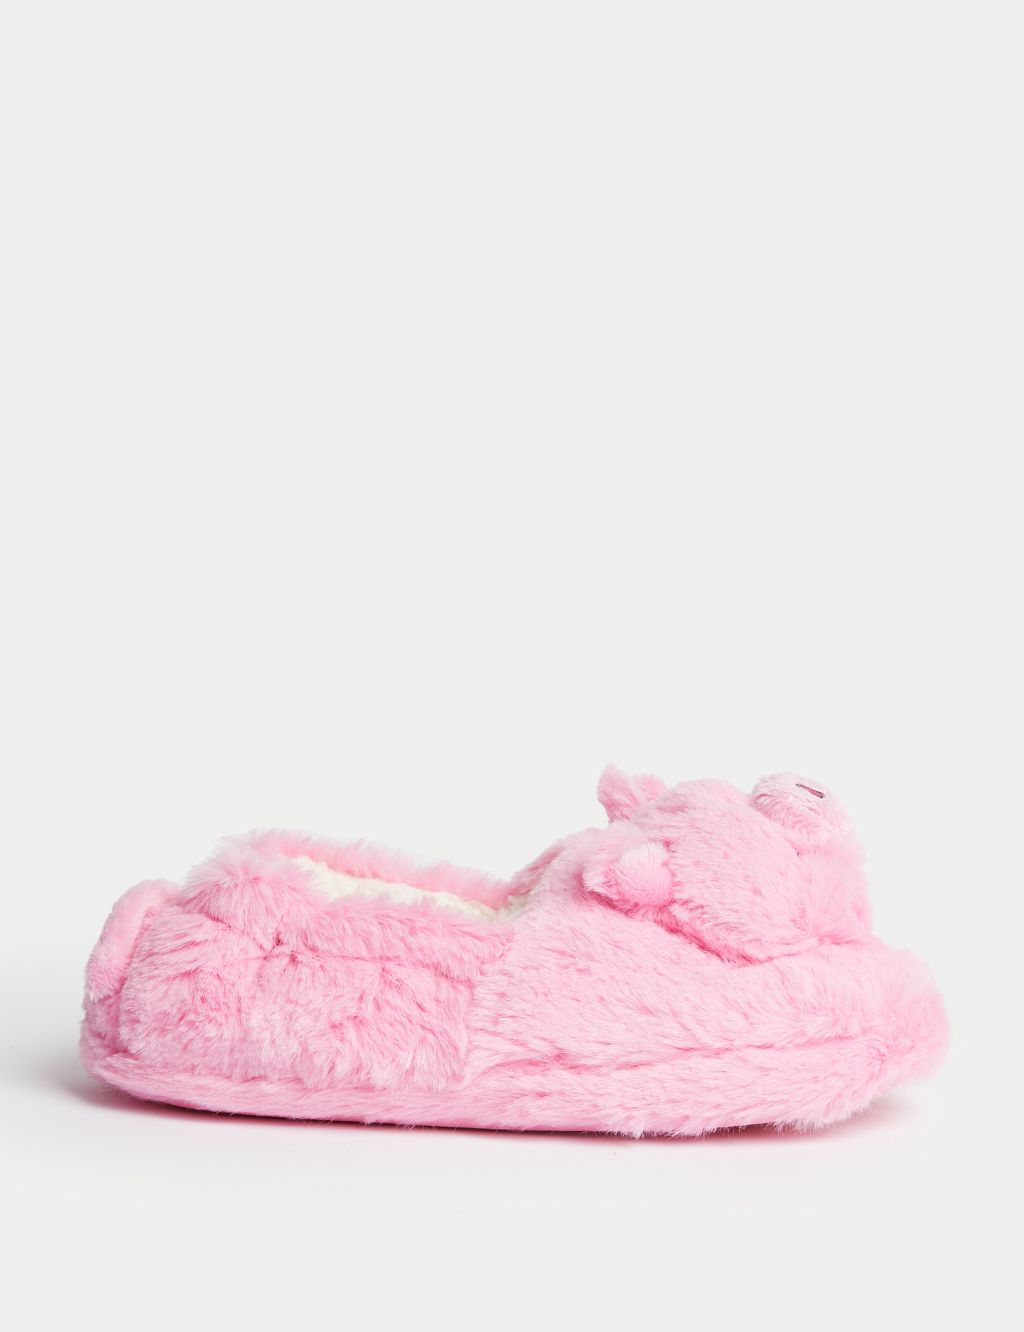 Kids' Percy Pig™ Slippers (5 Small - 6 Large) image 1